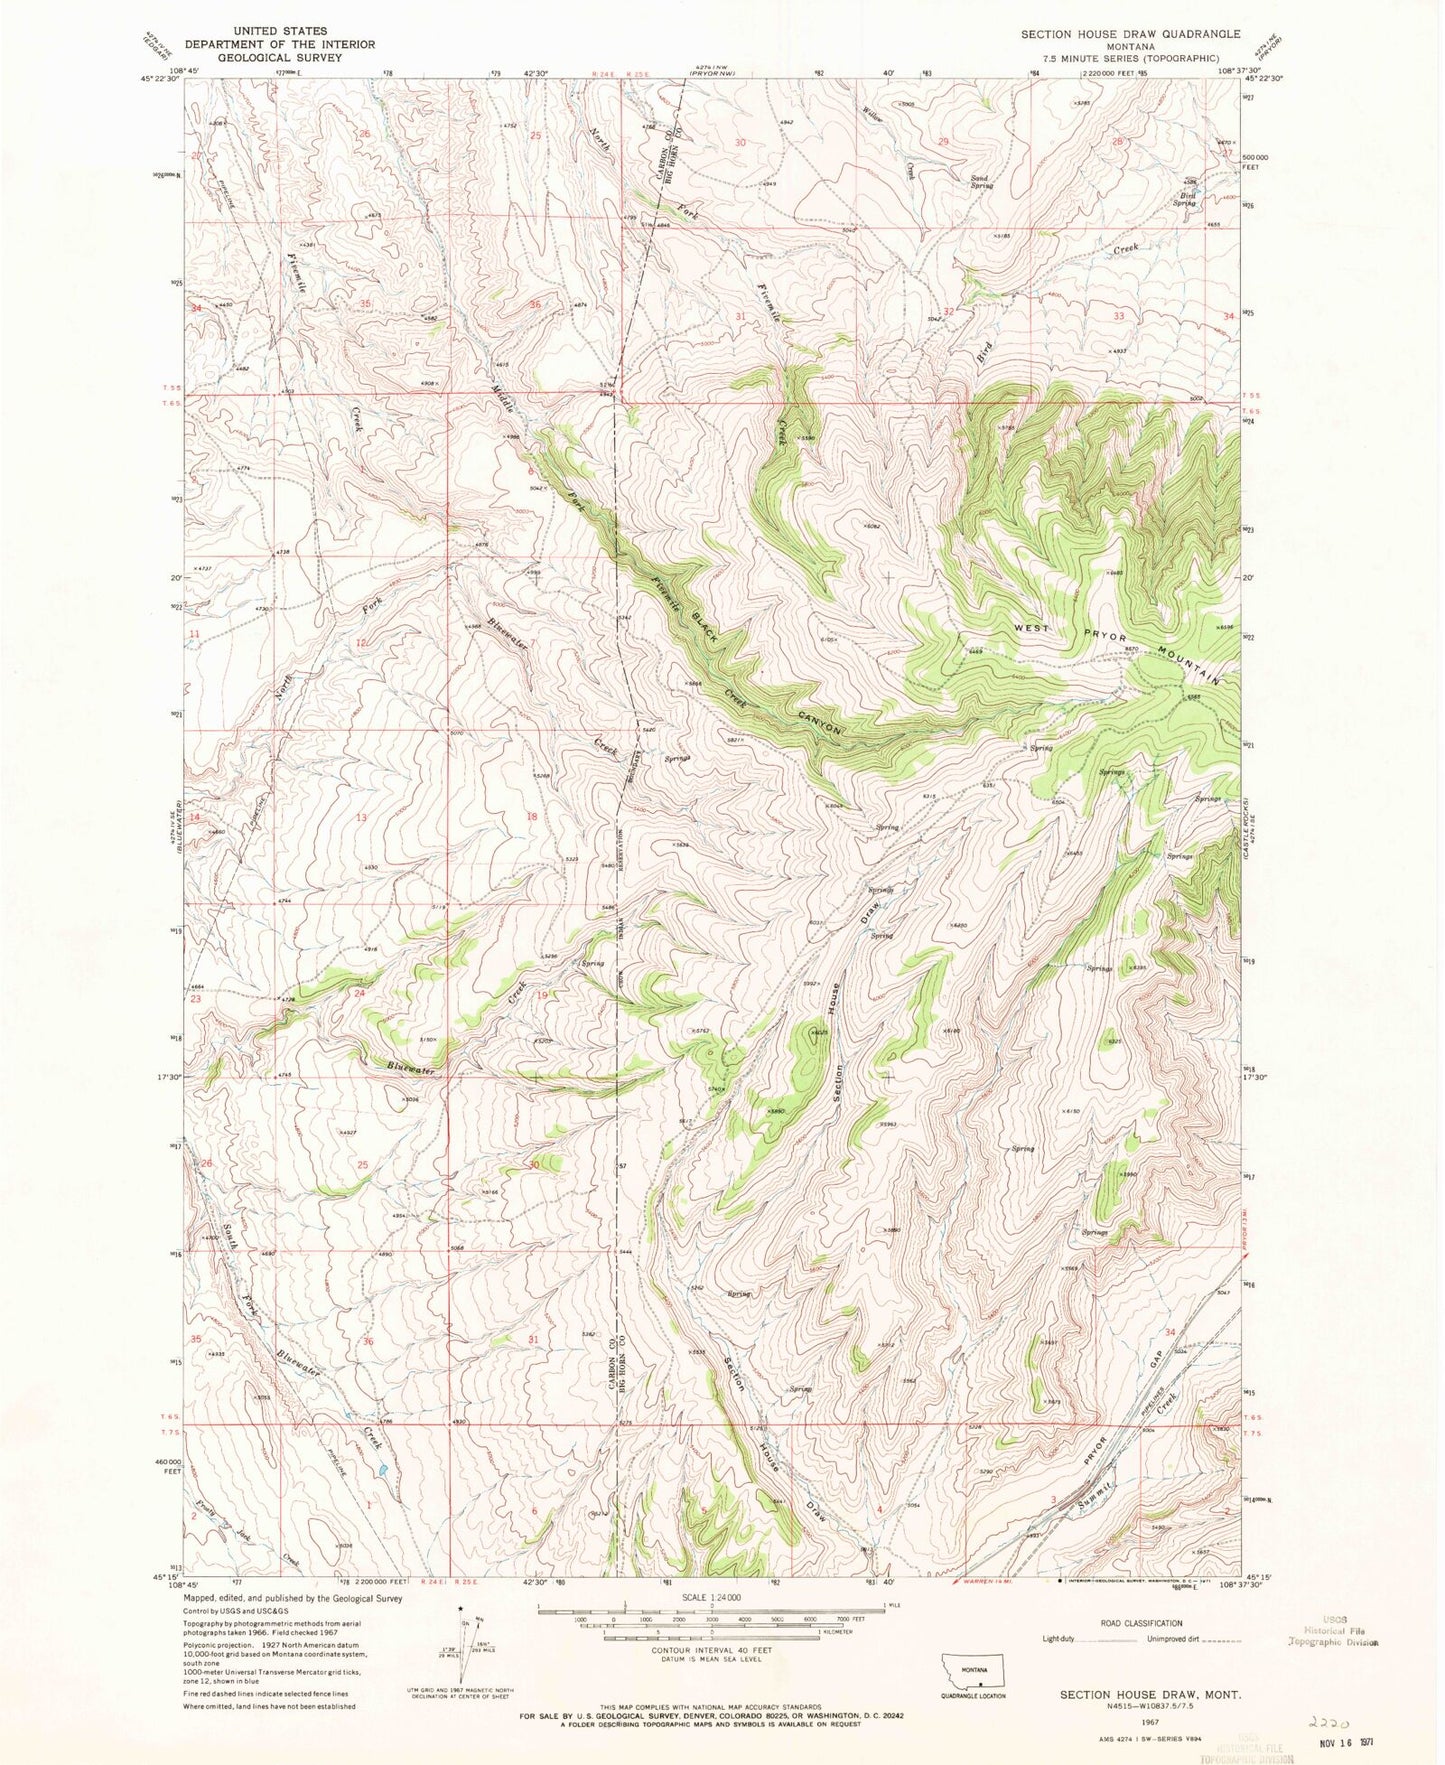 Classic USGS Section House Draw Montana 7.5'x7.5' Topo Map Image